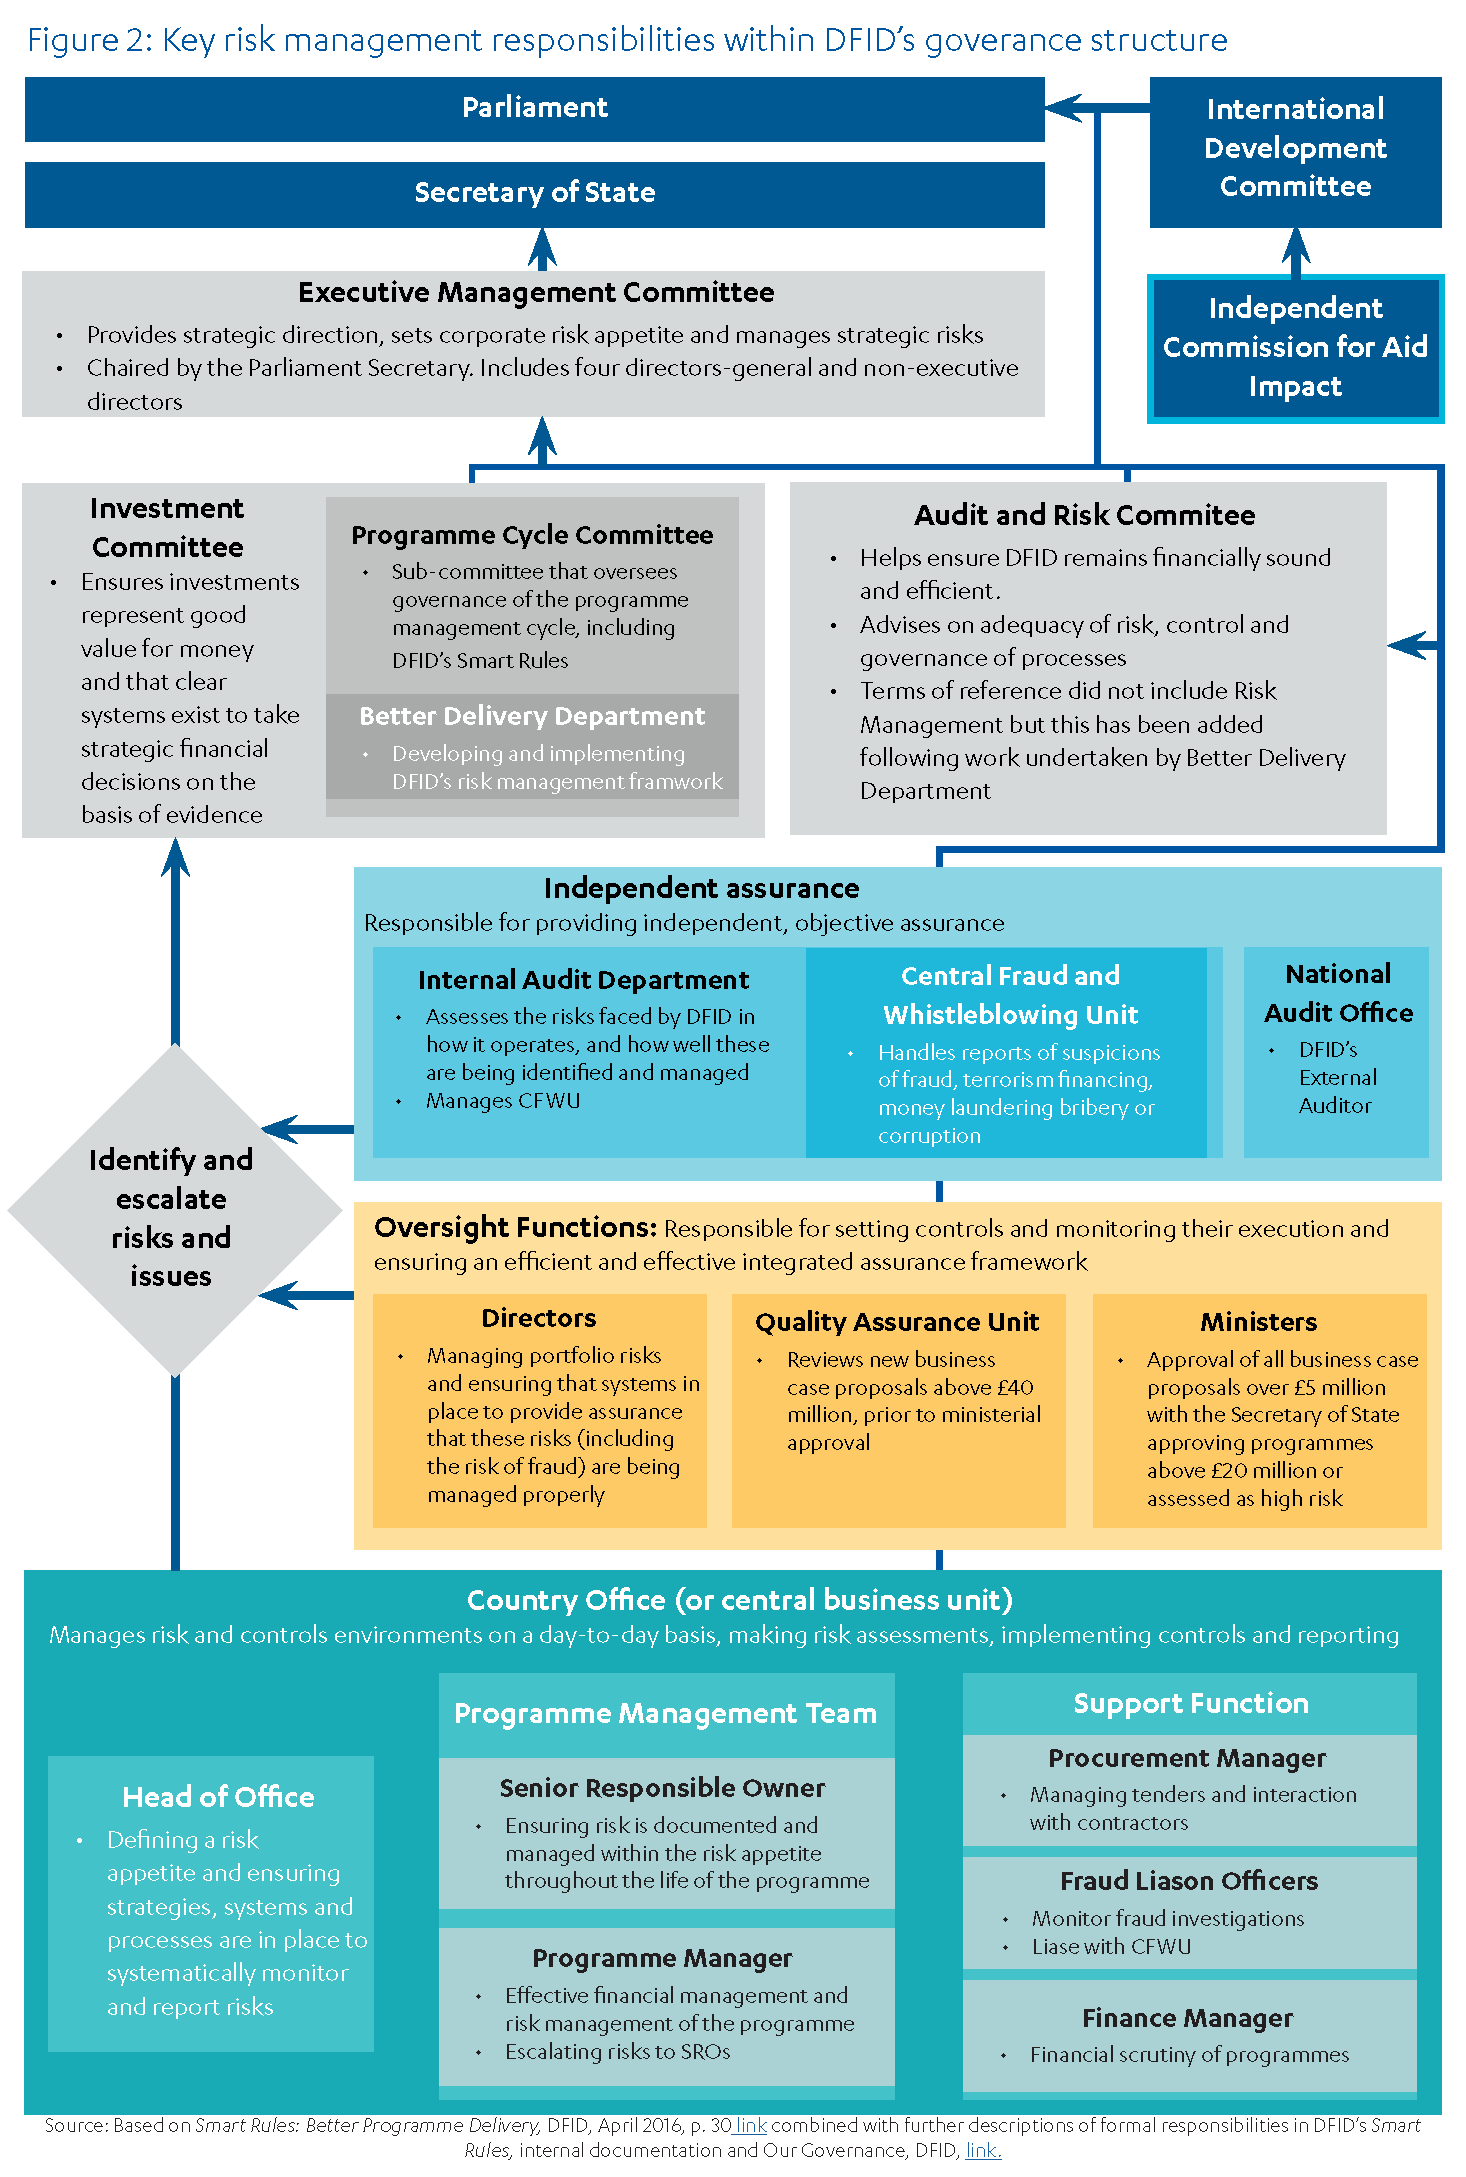 Chart showing the key risk management responsibilities within DFID's governance structure